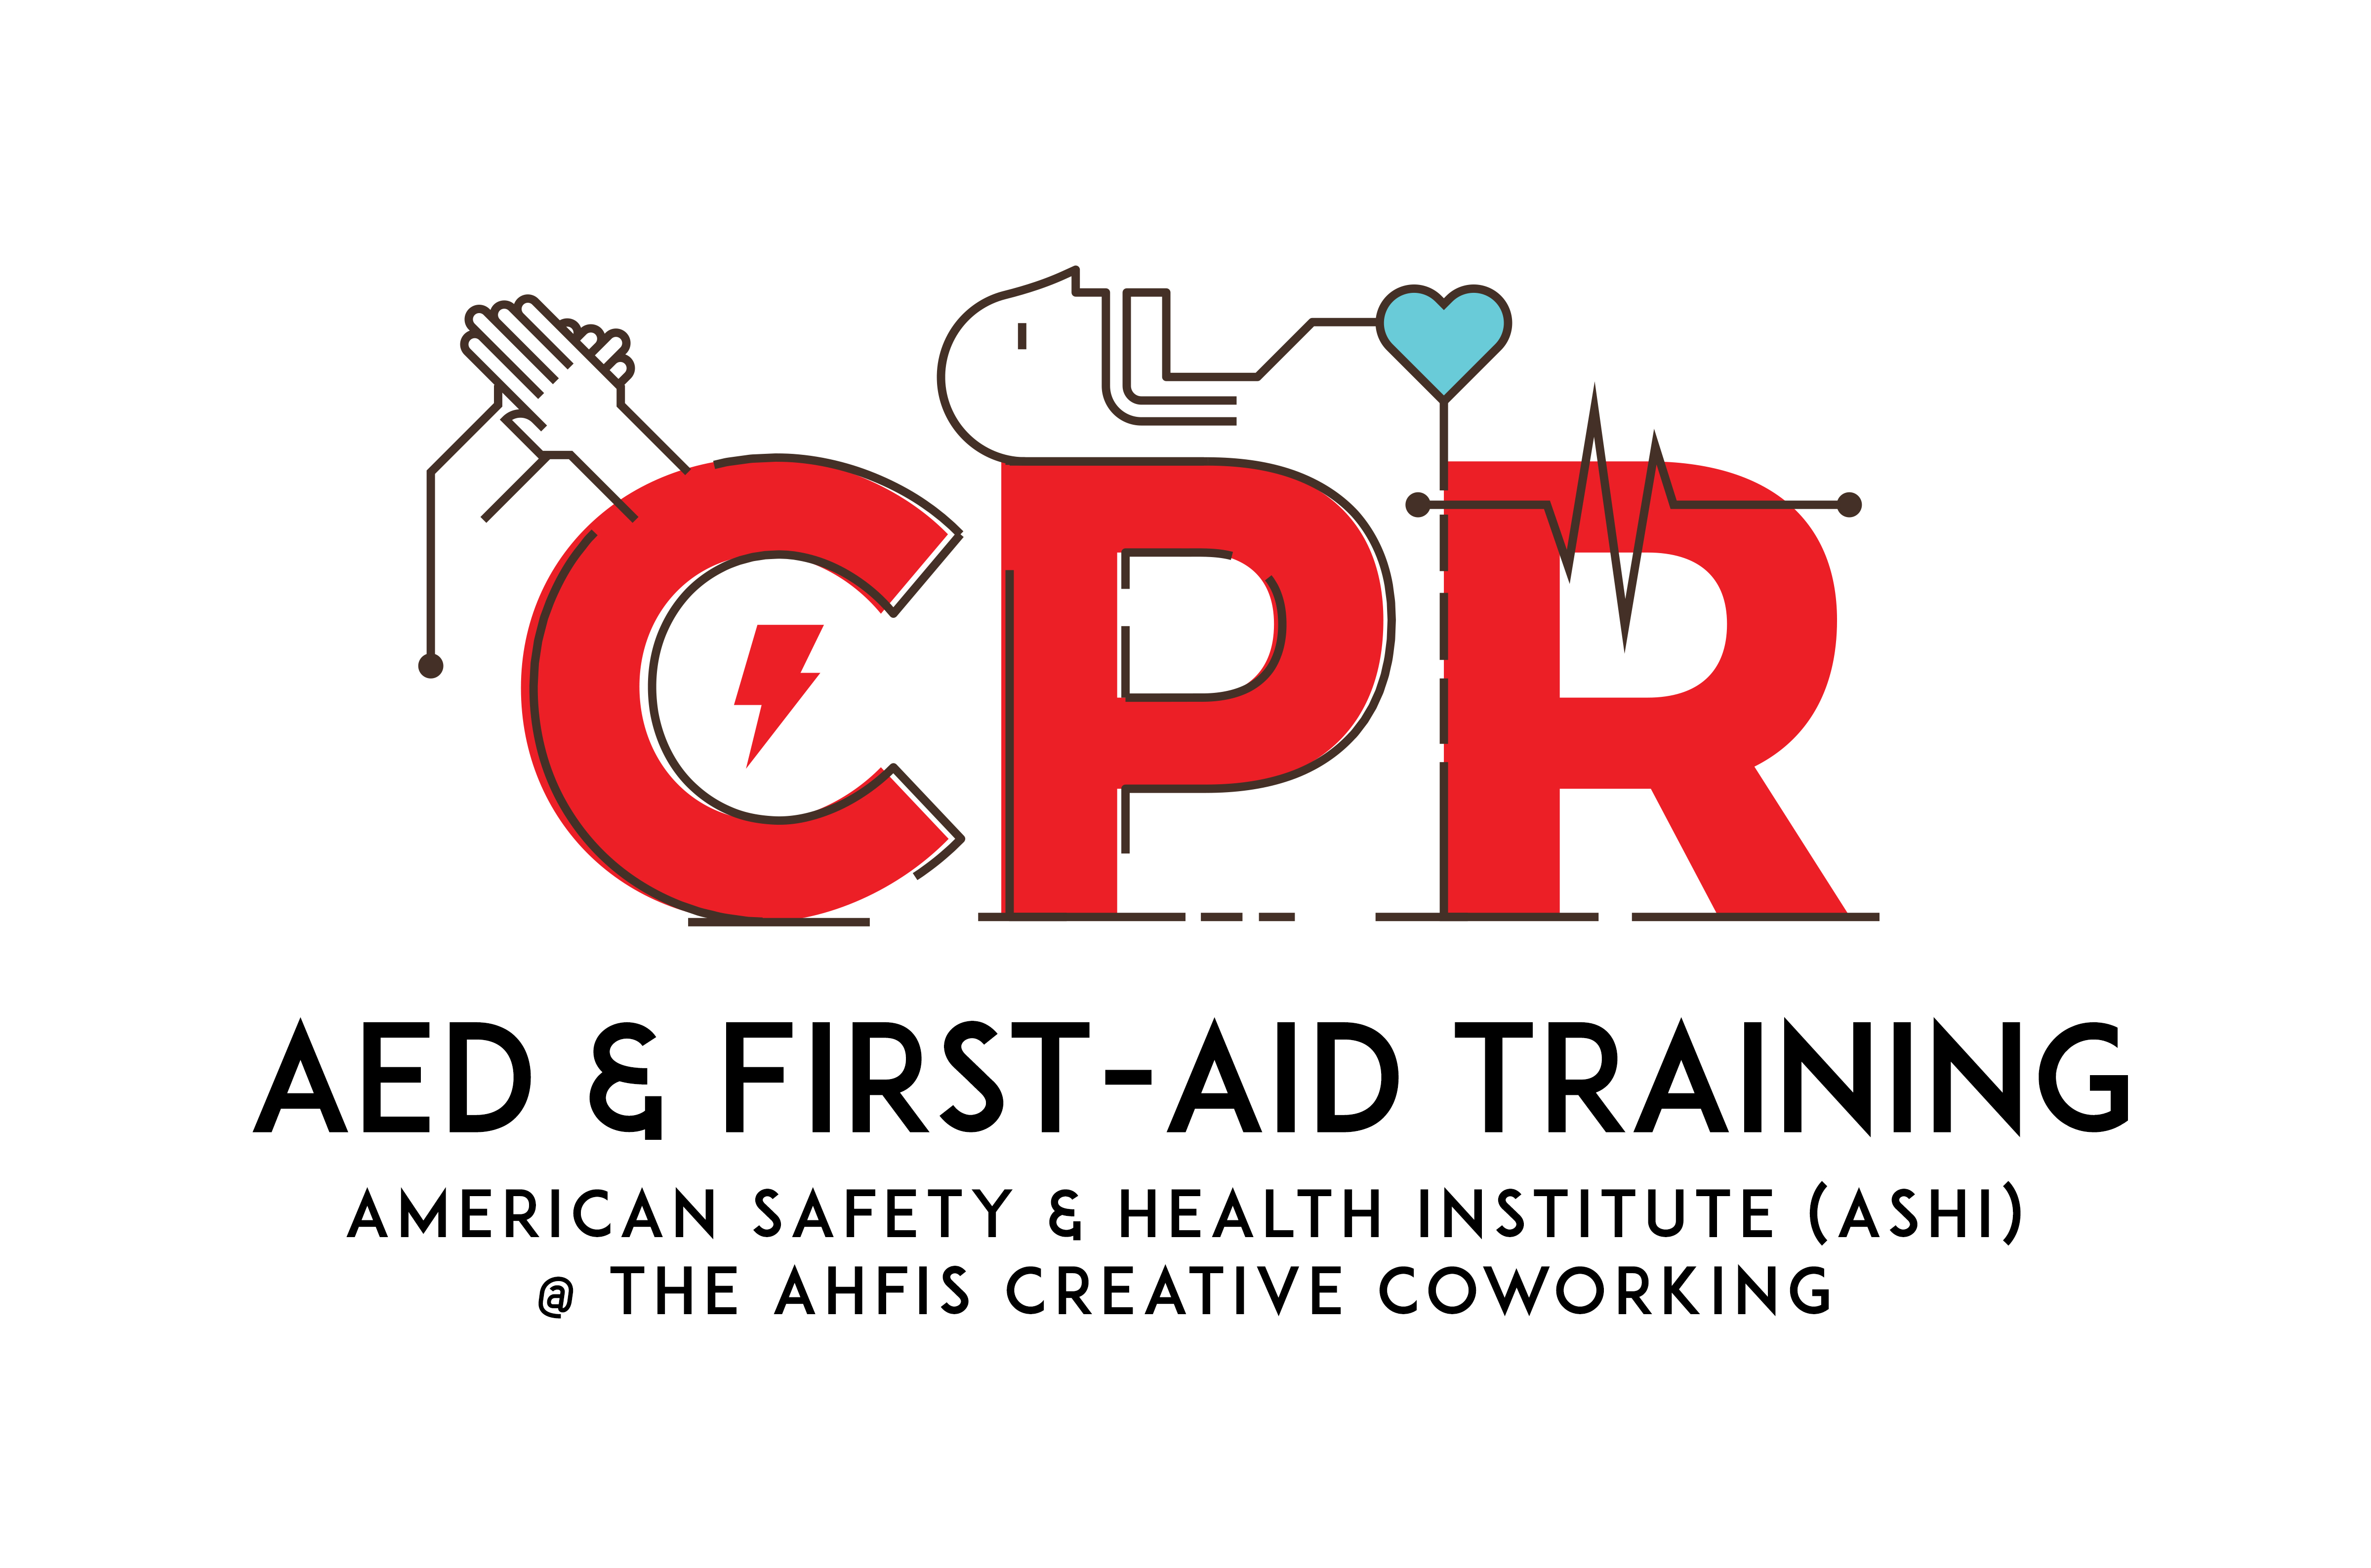 Copy of CPR/AED & First-aid Training Class